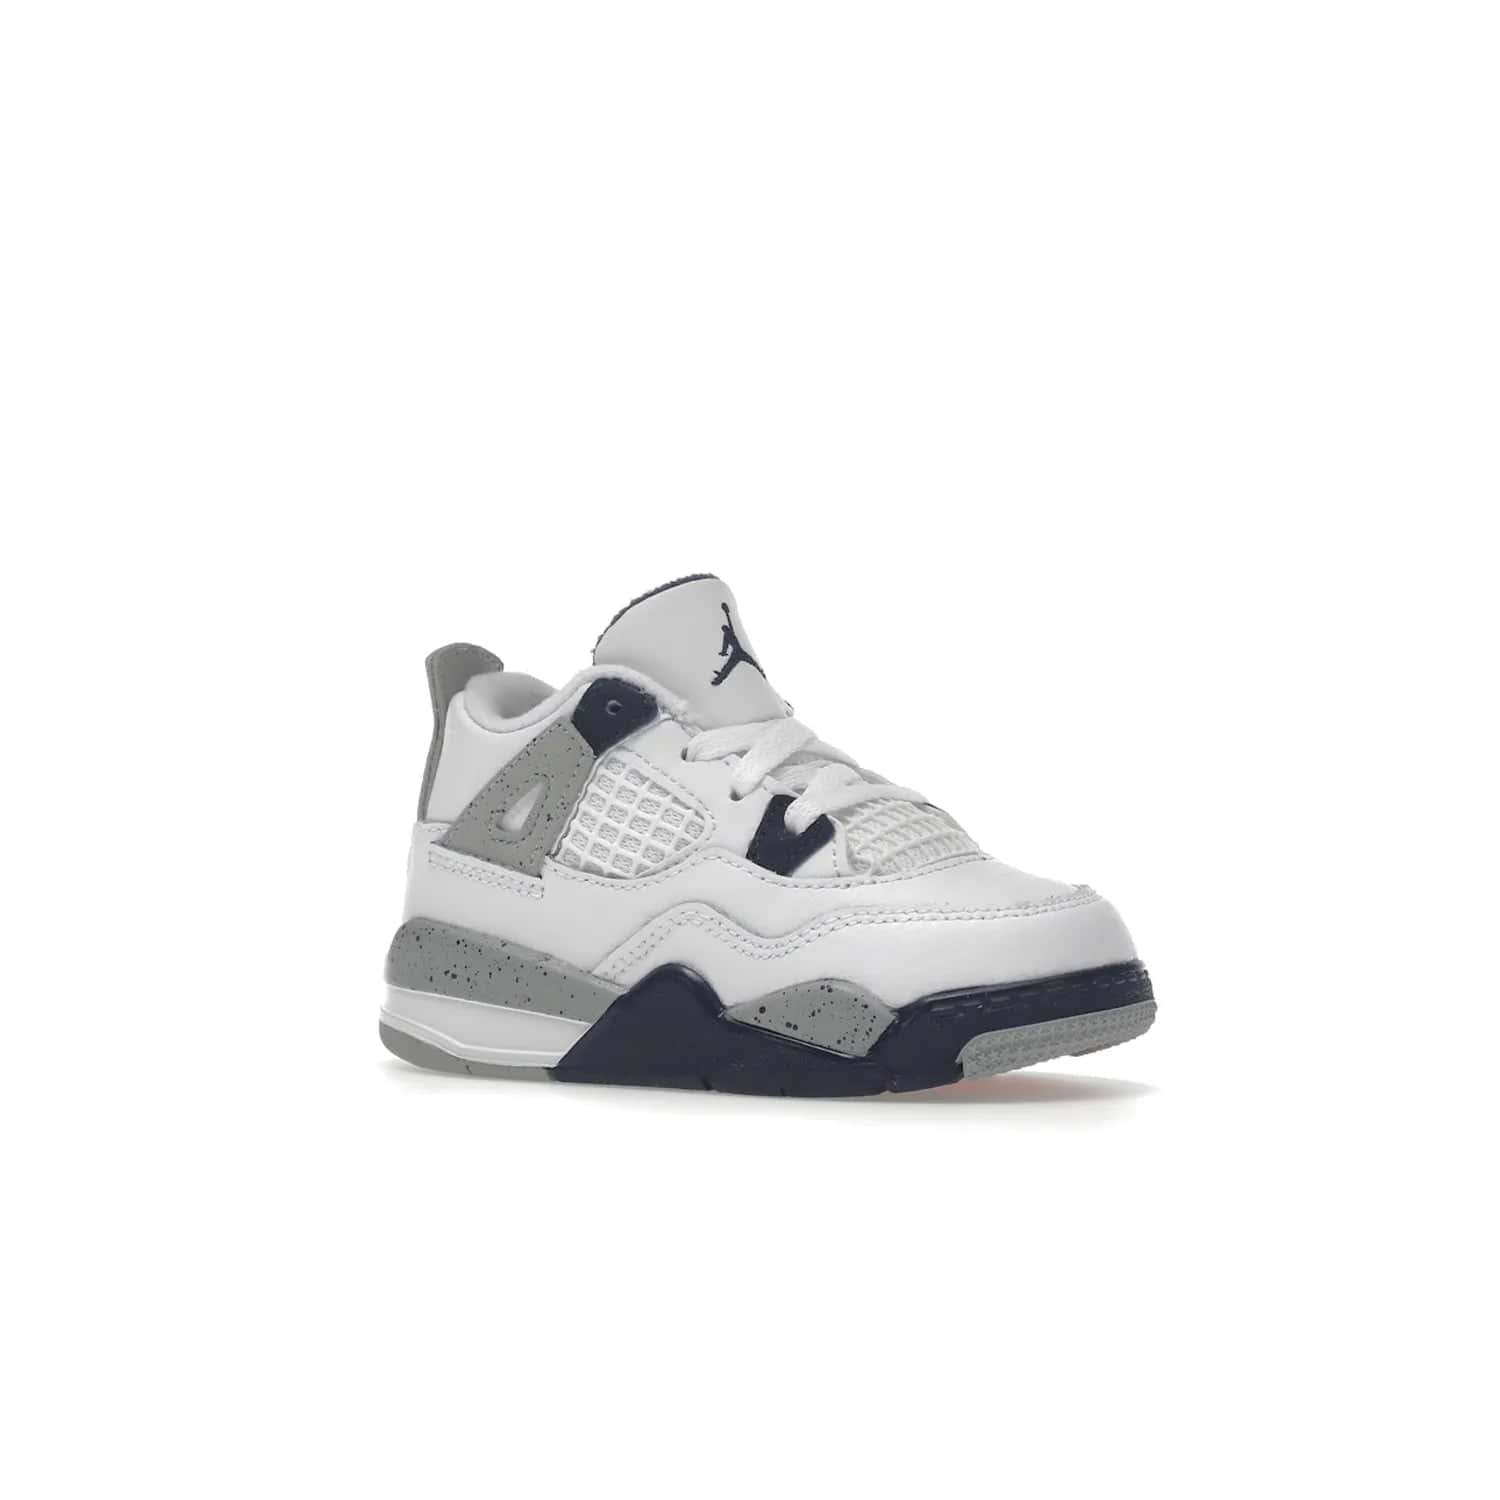 Jordan 4 Retro Midnight Navy (TD) - Image 4 - Only at www.BallersClubKickz.com - Introducing the Jordan 4 Retro Midnight Navy (TD) for kids. White leather upper with navy and grey accents plus fire red detailing. Perfect for everyday wear. Get yours before they sell out.